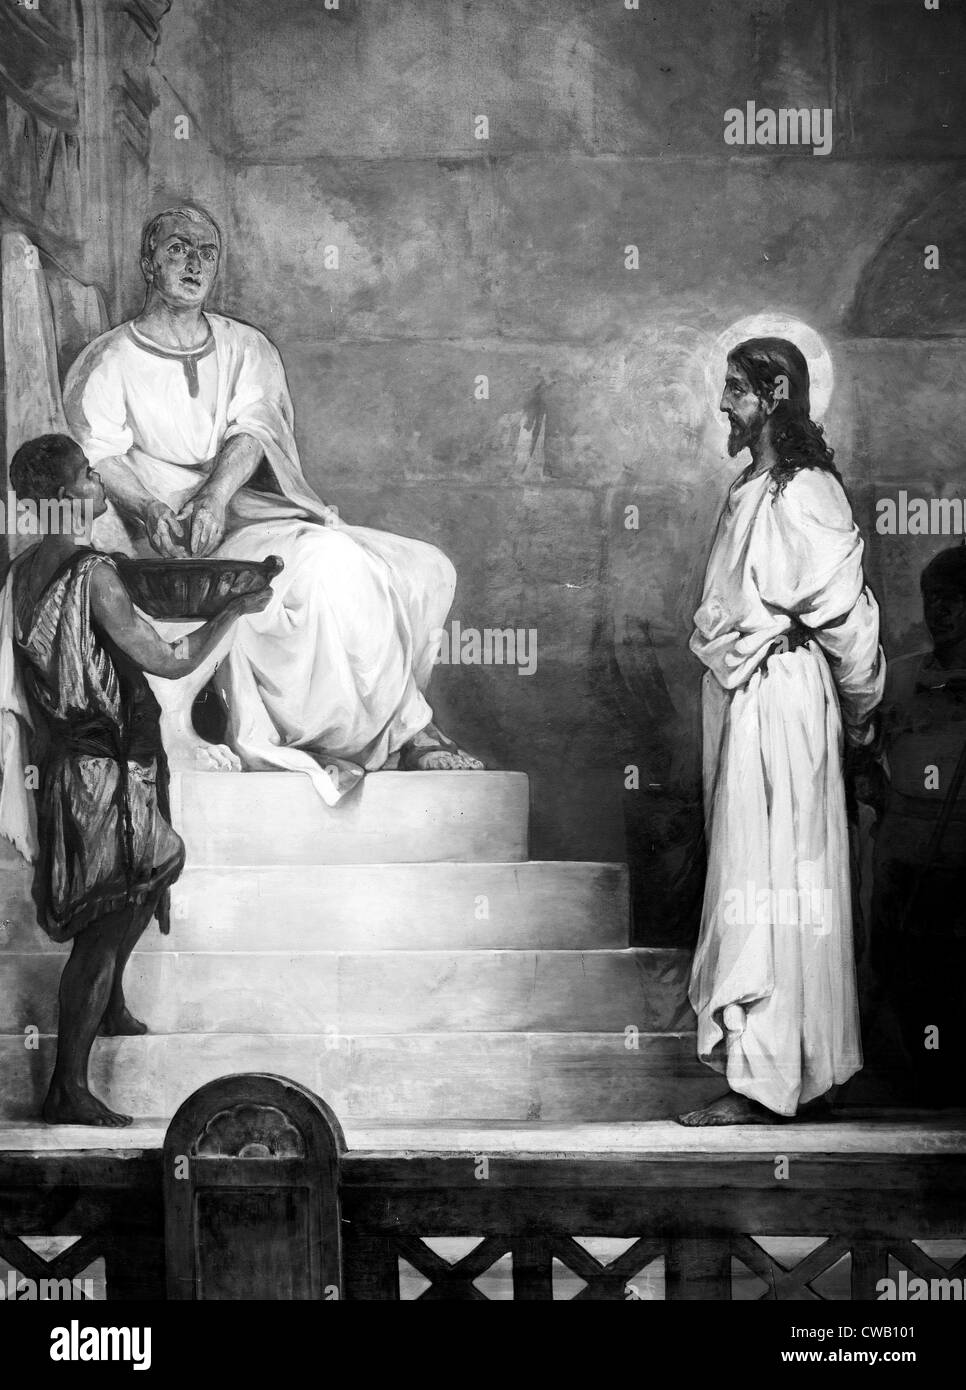 Jesus Christ, title: Pontius Pilate washing his hands, from Christ's Passion set of paintings by Kosheleff, circa early 1900s. Stock Photo